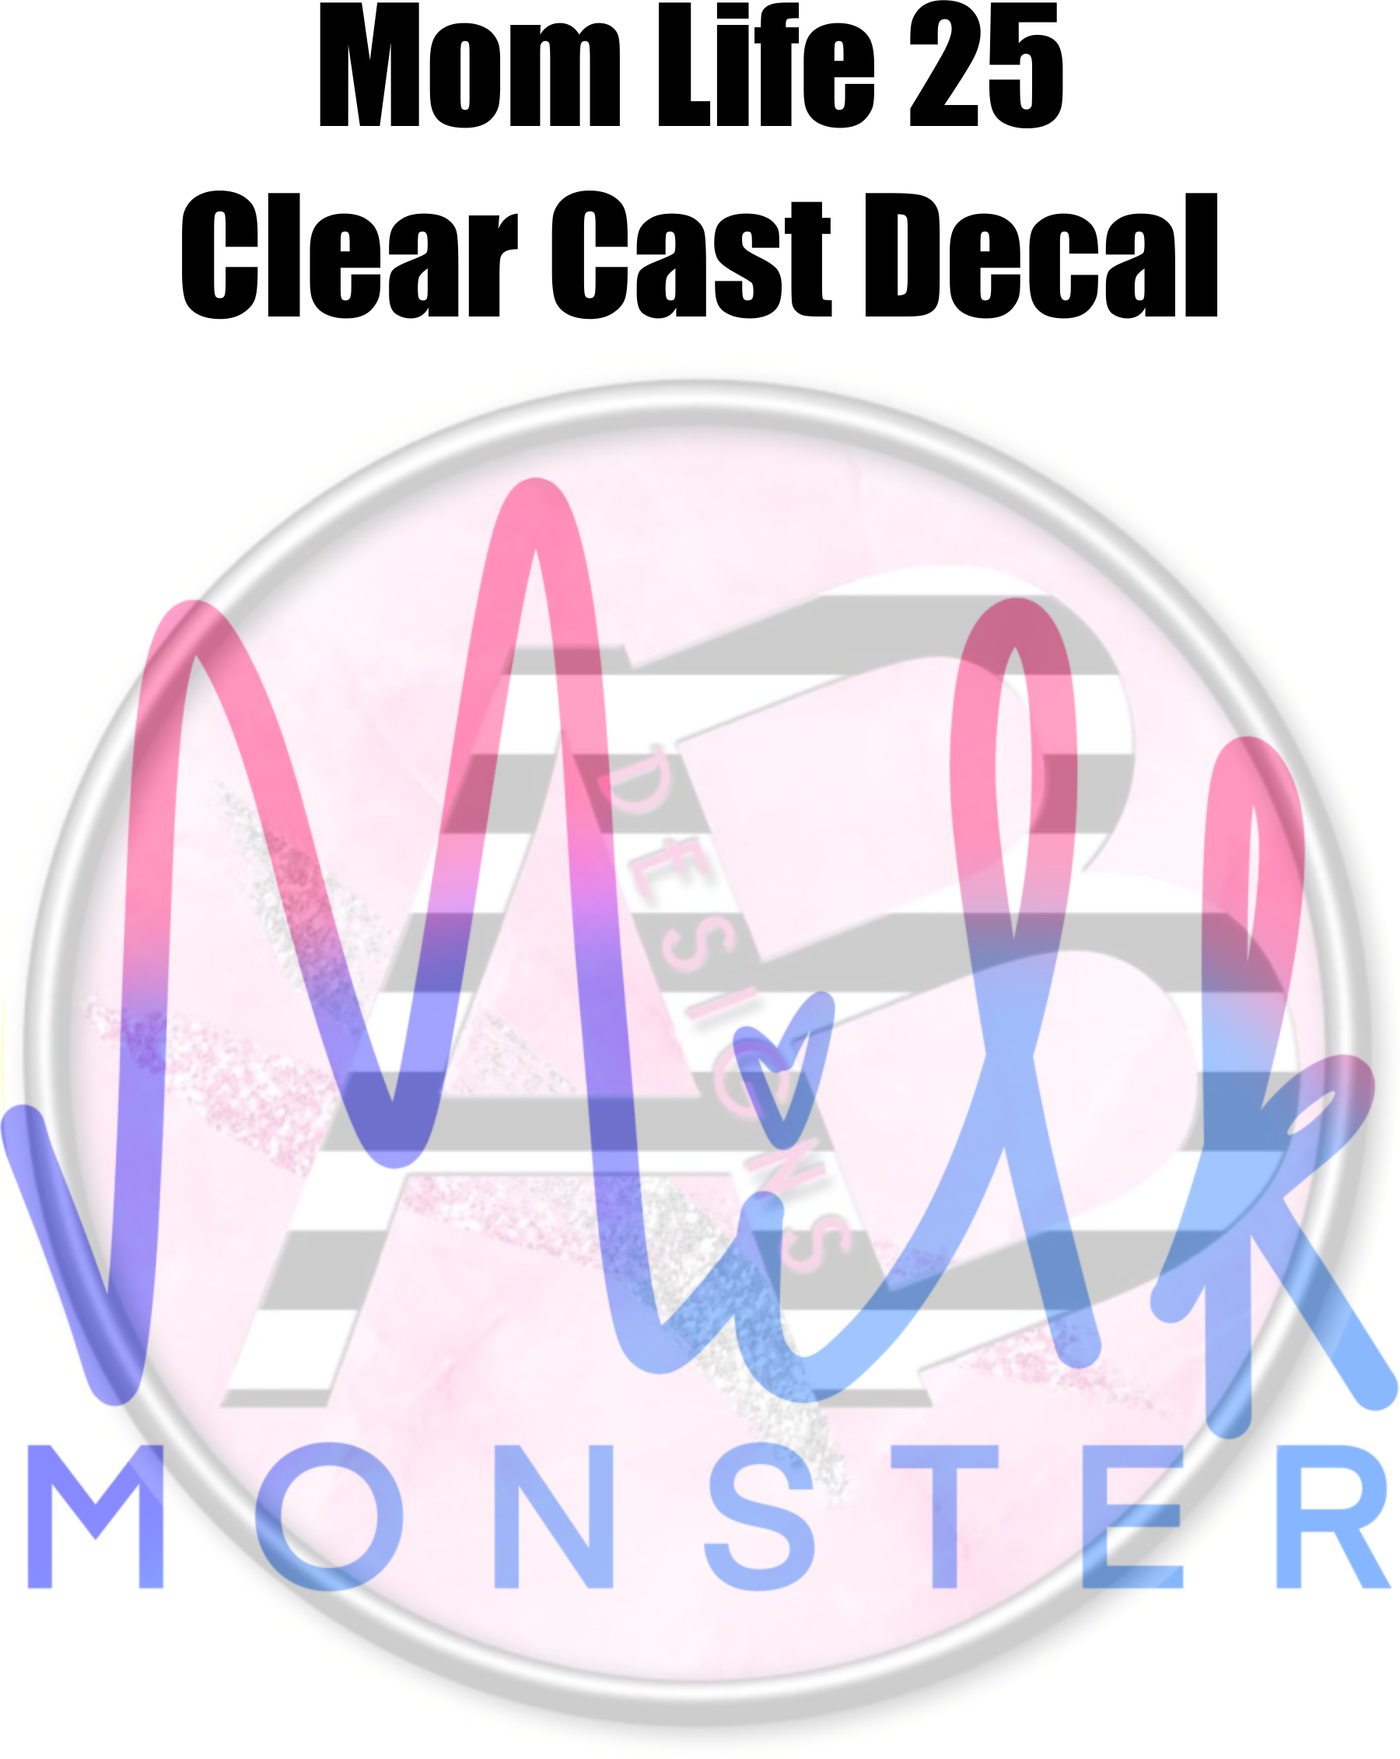 Mom Life 25 - Clear Cast Decal